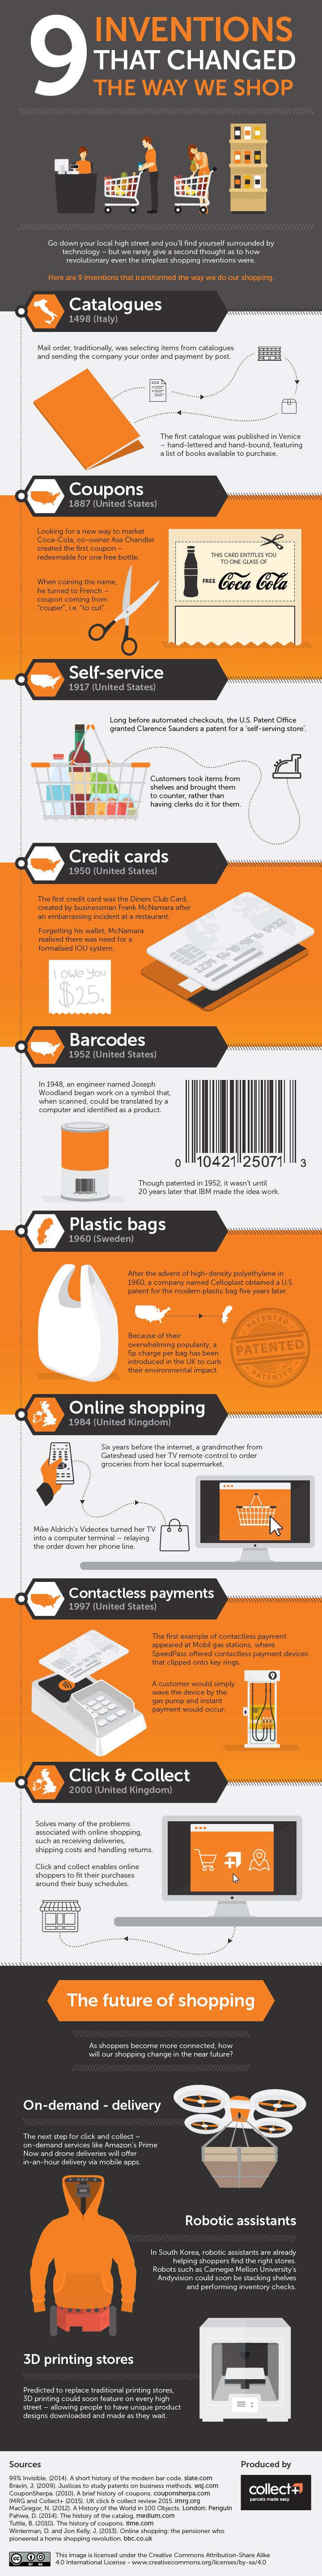 9 Inventions that changed the way we shop iNFOGRAPHIC